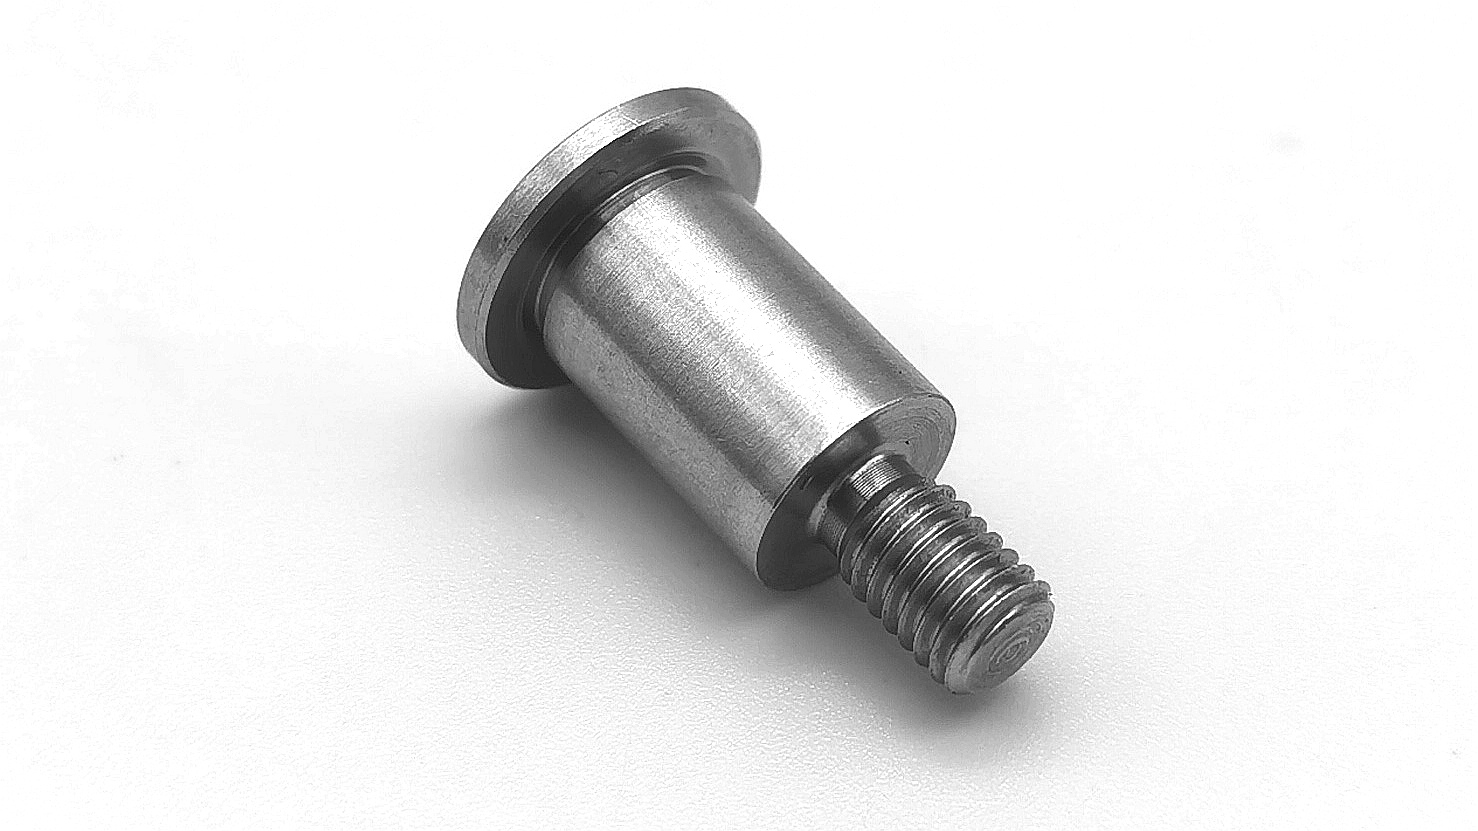 Customized HEX SOCKET RECESS SHOULDER SCREW manufacturers From China